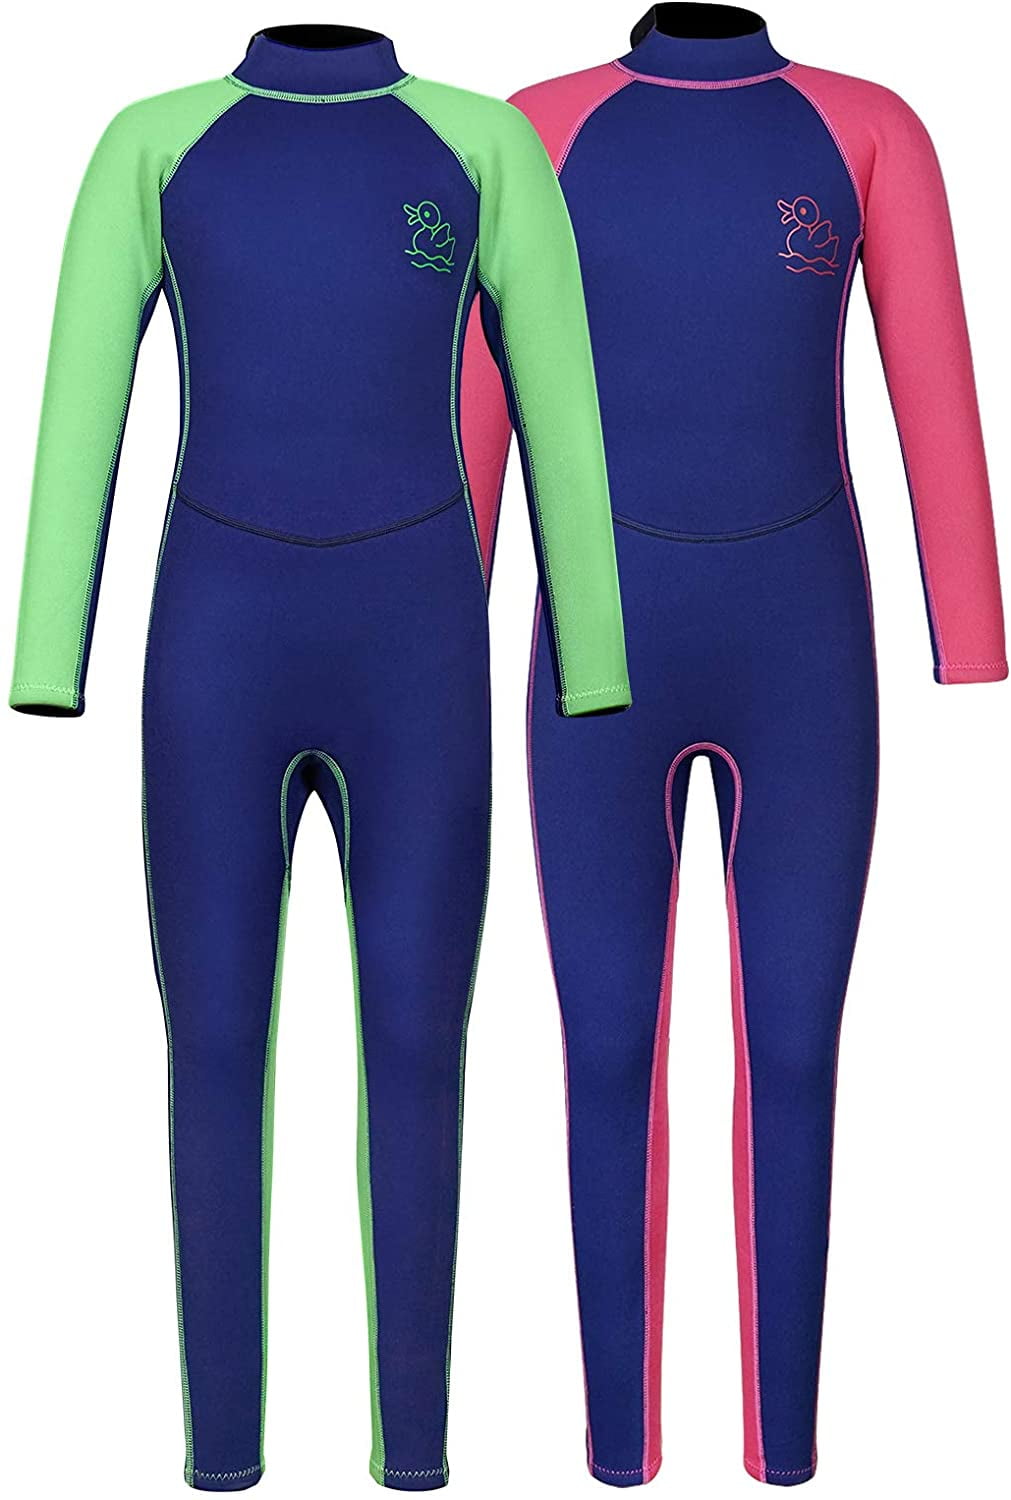 1 Pcs Long Sleeves Kids Boy Girls Wetsuits Diving Suits Keeps Warm f/ Snorkeling 